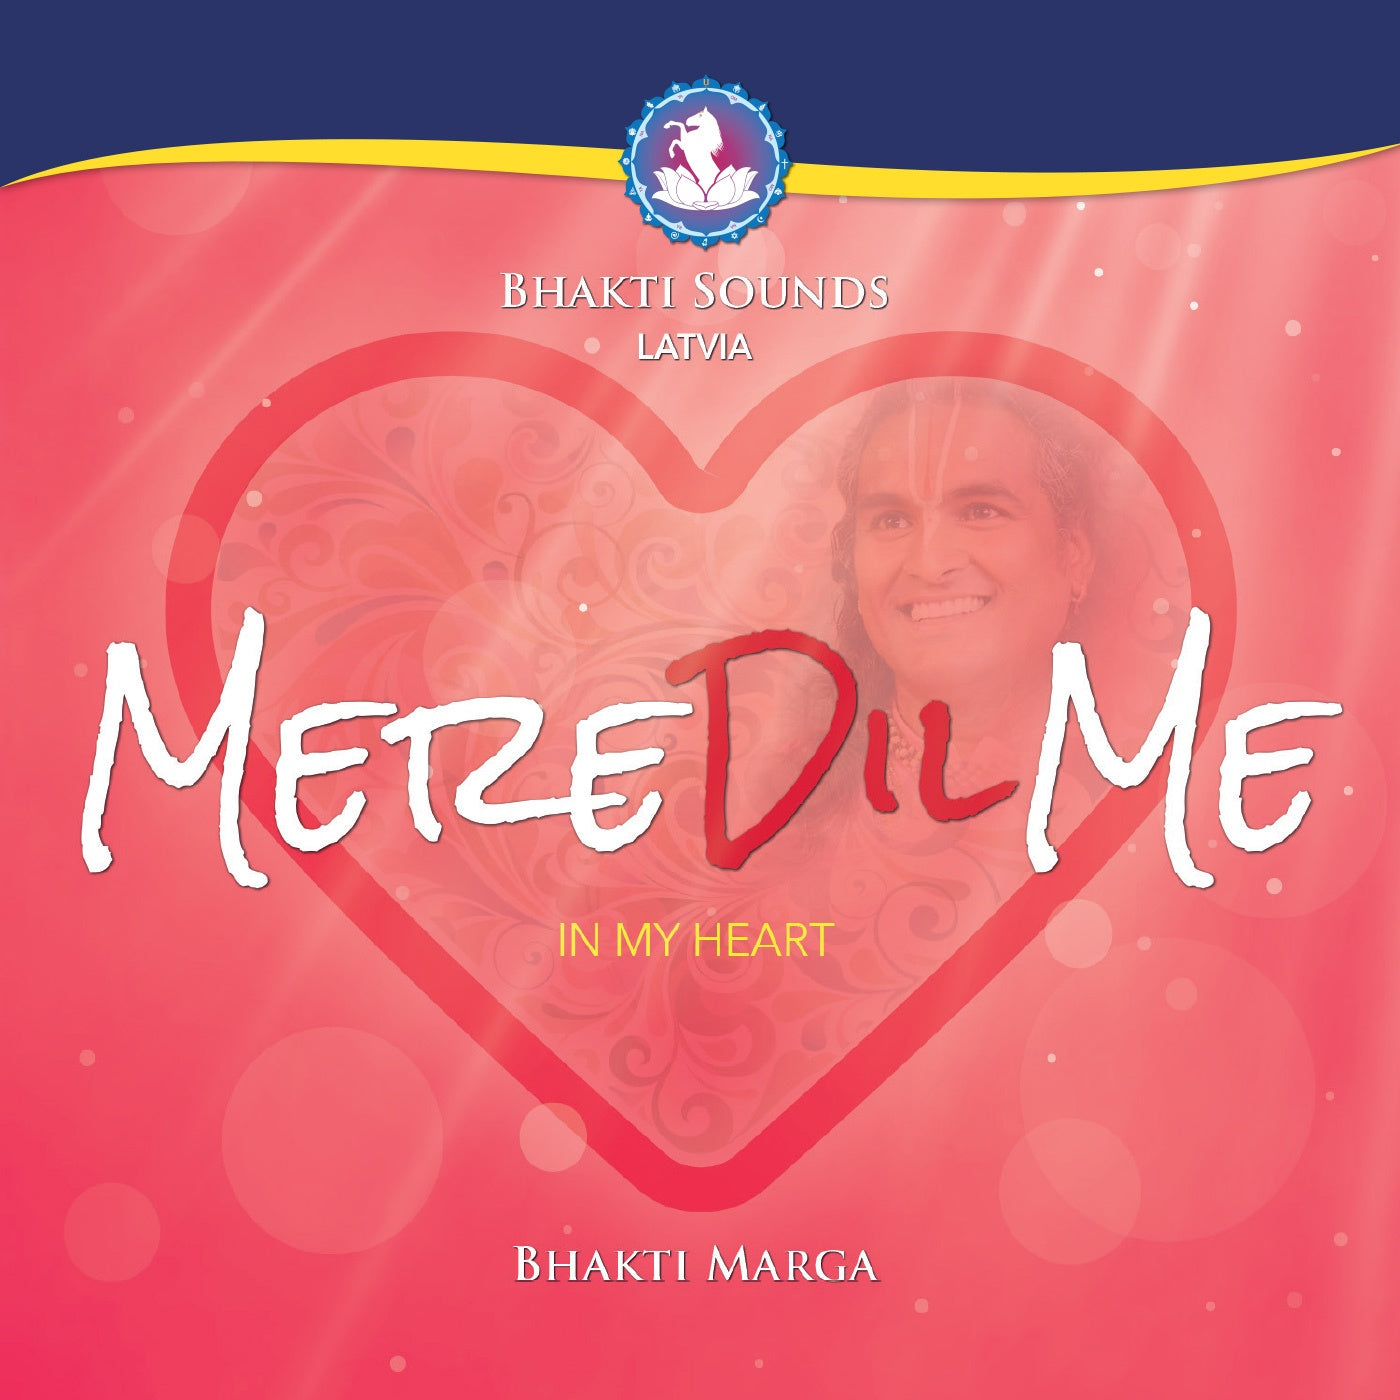 Bhakti Sounds Latvia: Mere Dil Me (In My Heart)